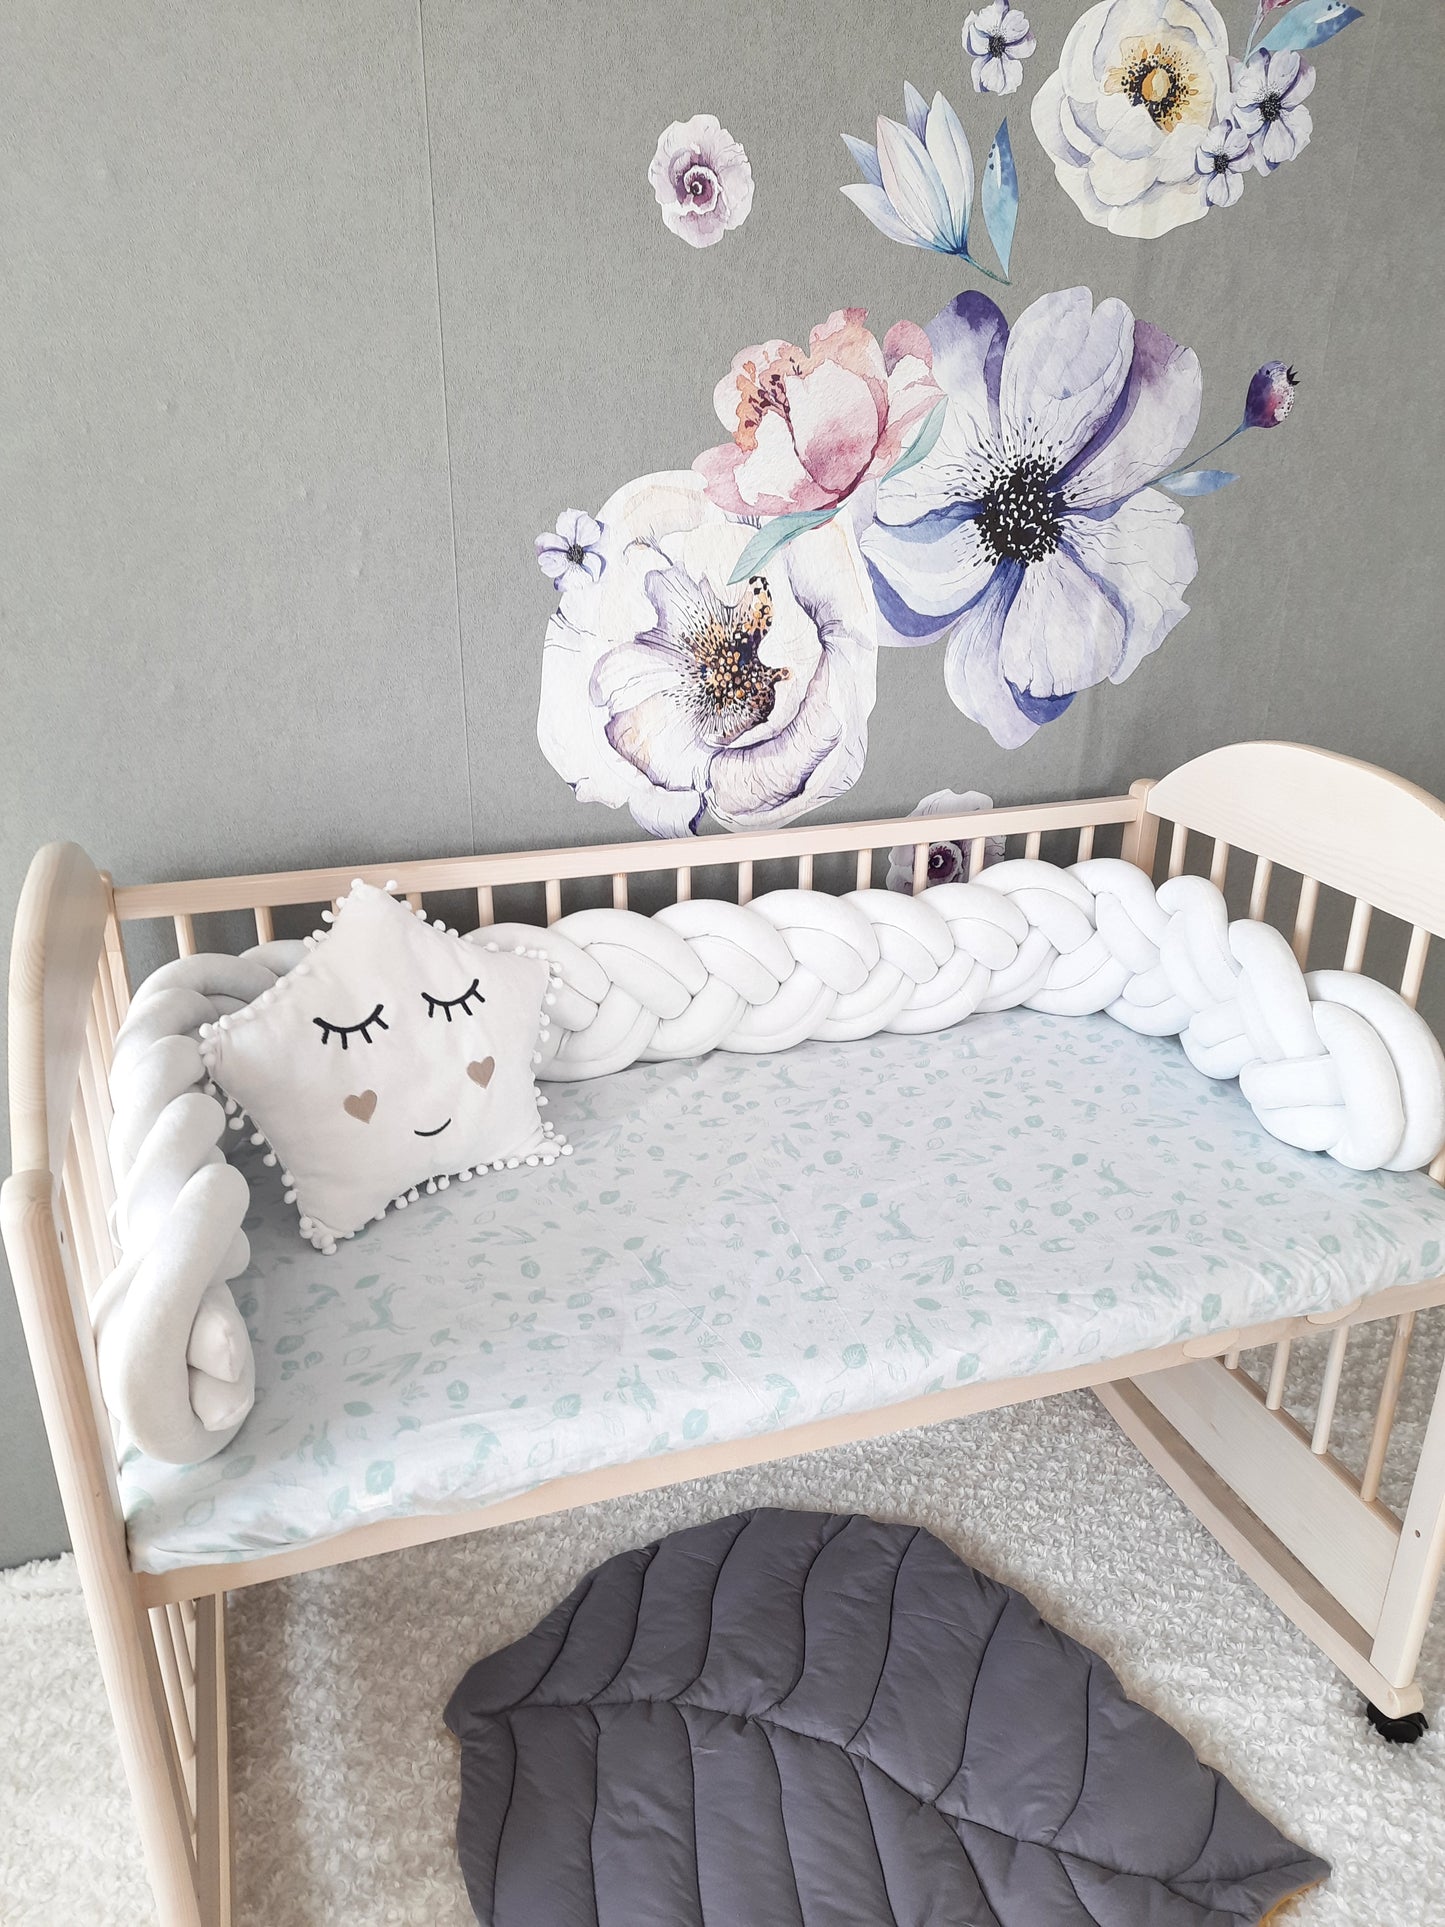 White braided bumper with white star pillow on the crib. Allbright kids best nursery products.